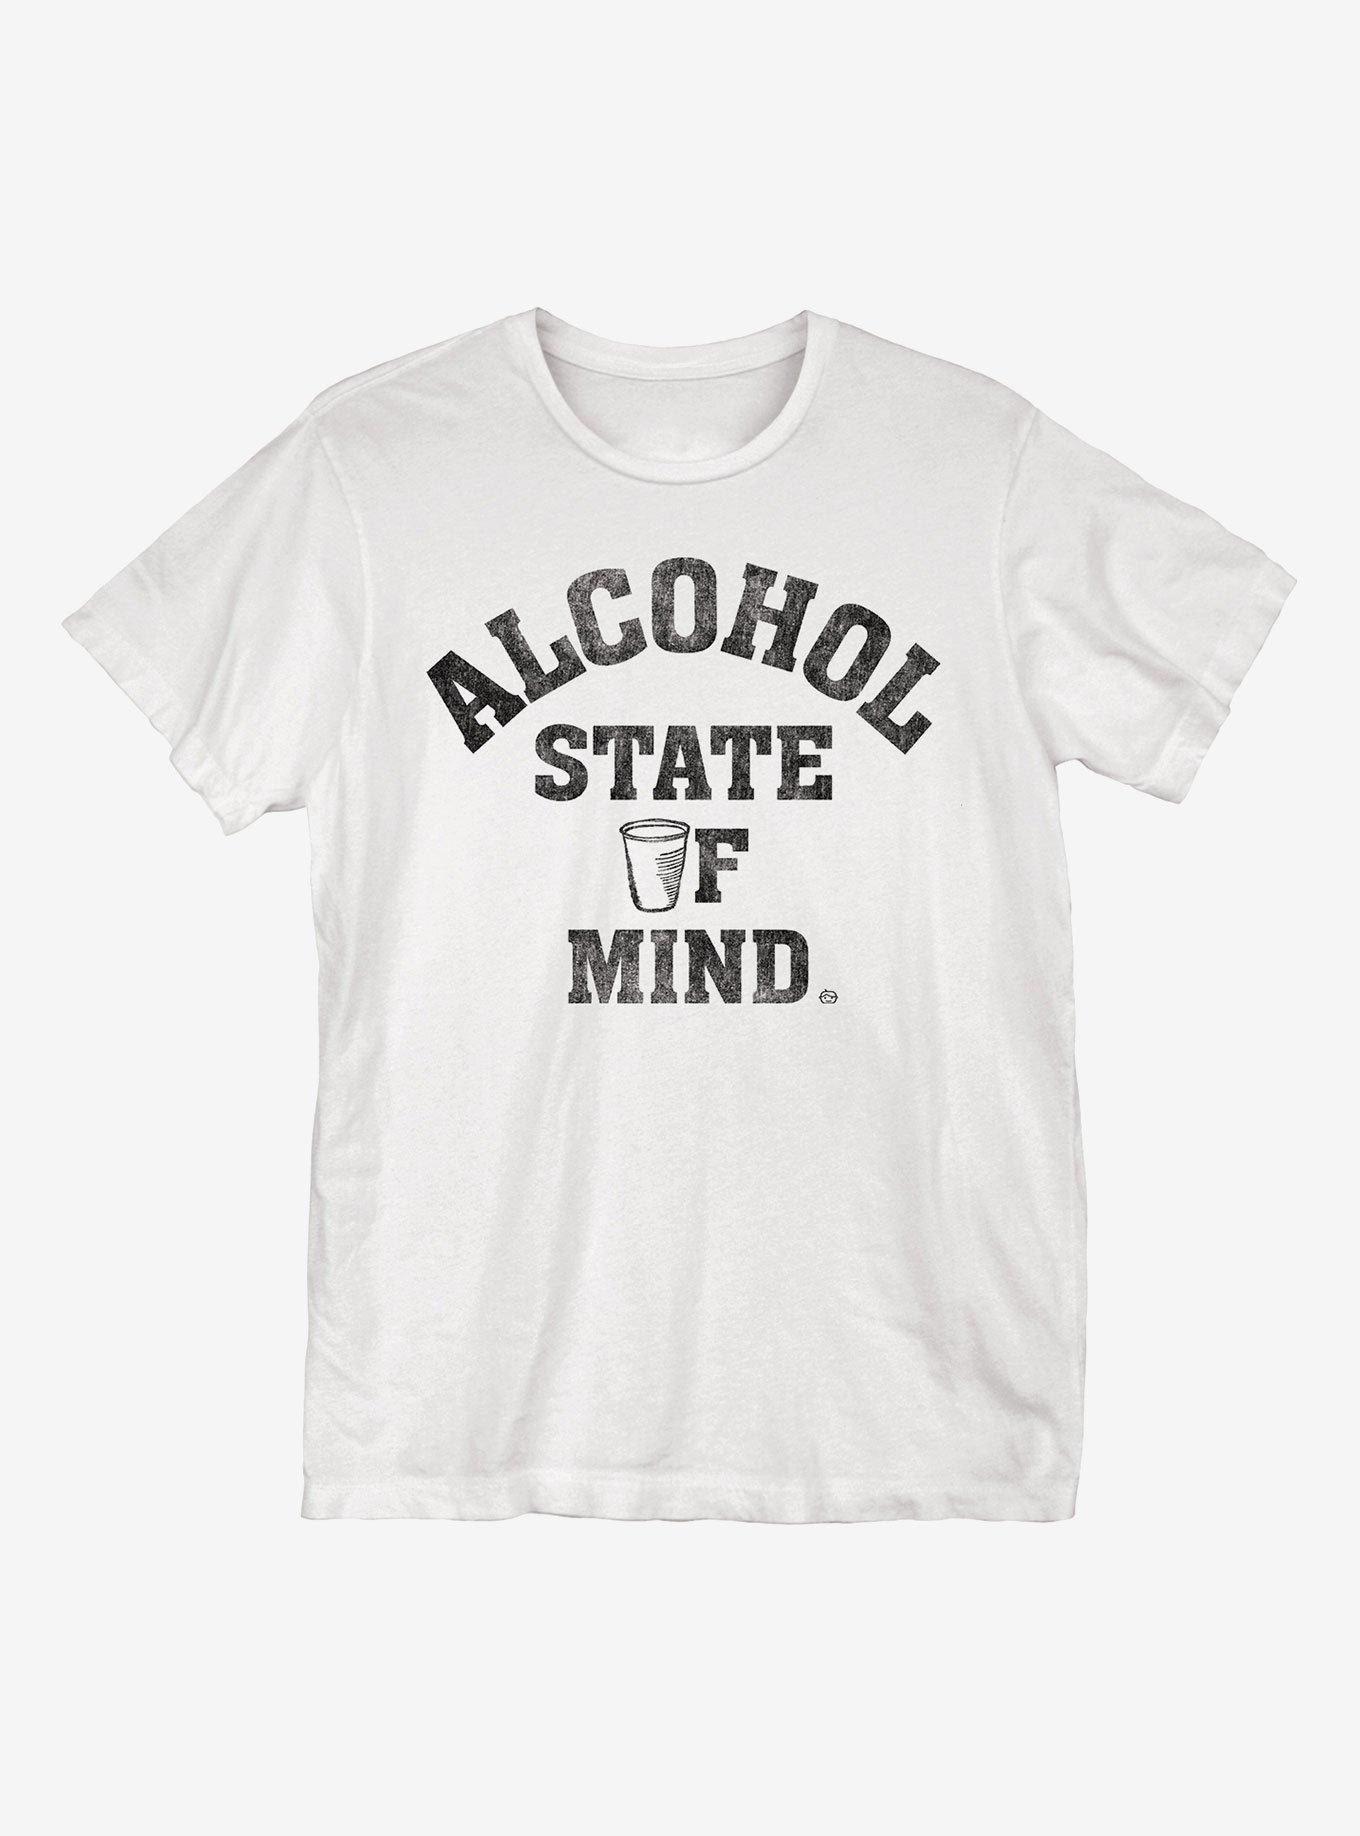 Alcohol State of Mind T-Shirt